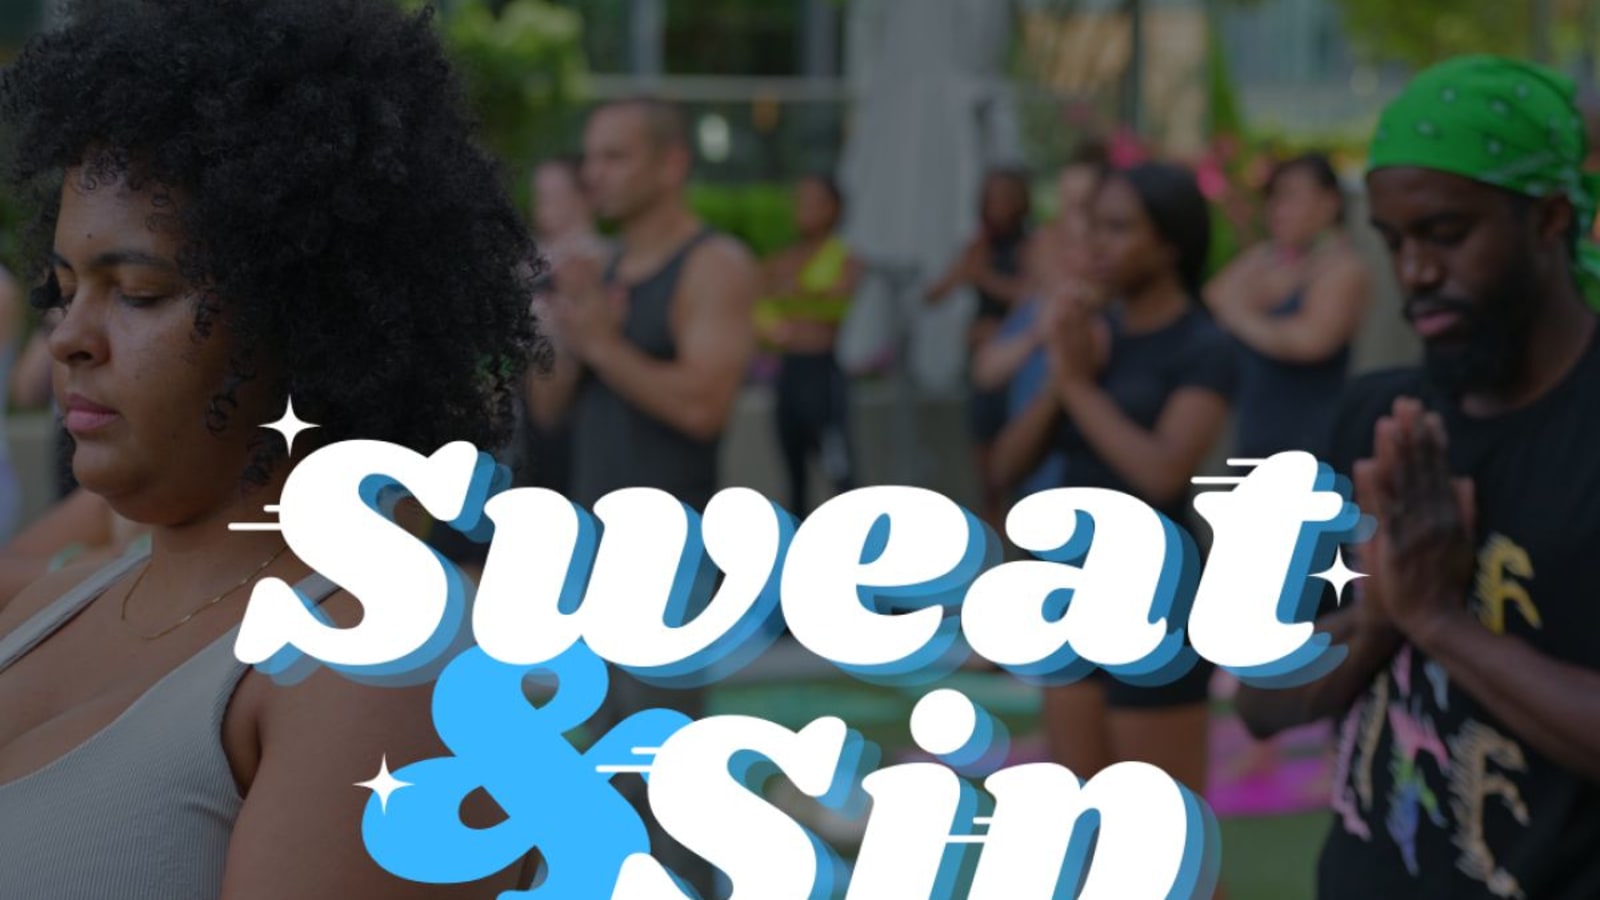 Sweat & Sip in the Sky Powered by Lululemon